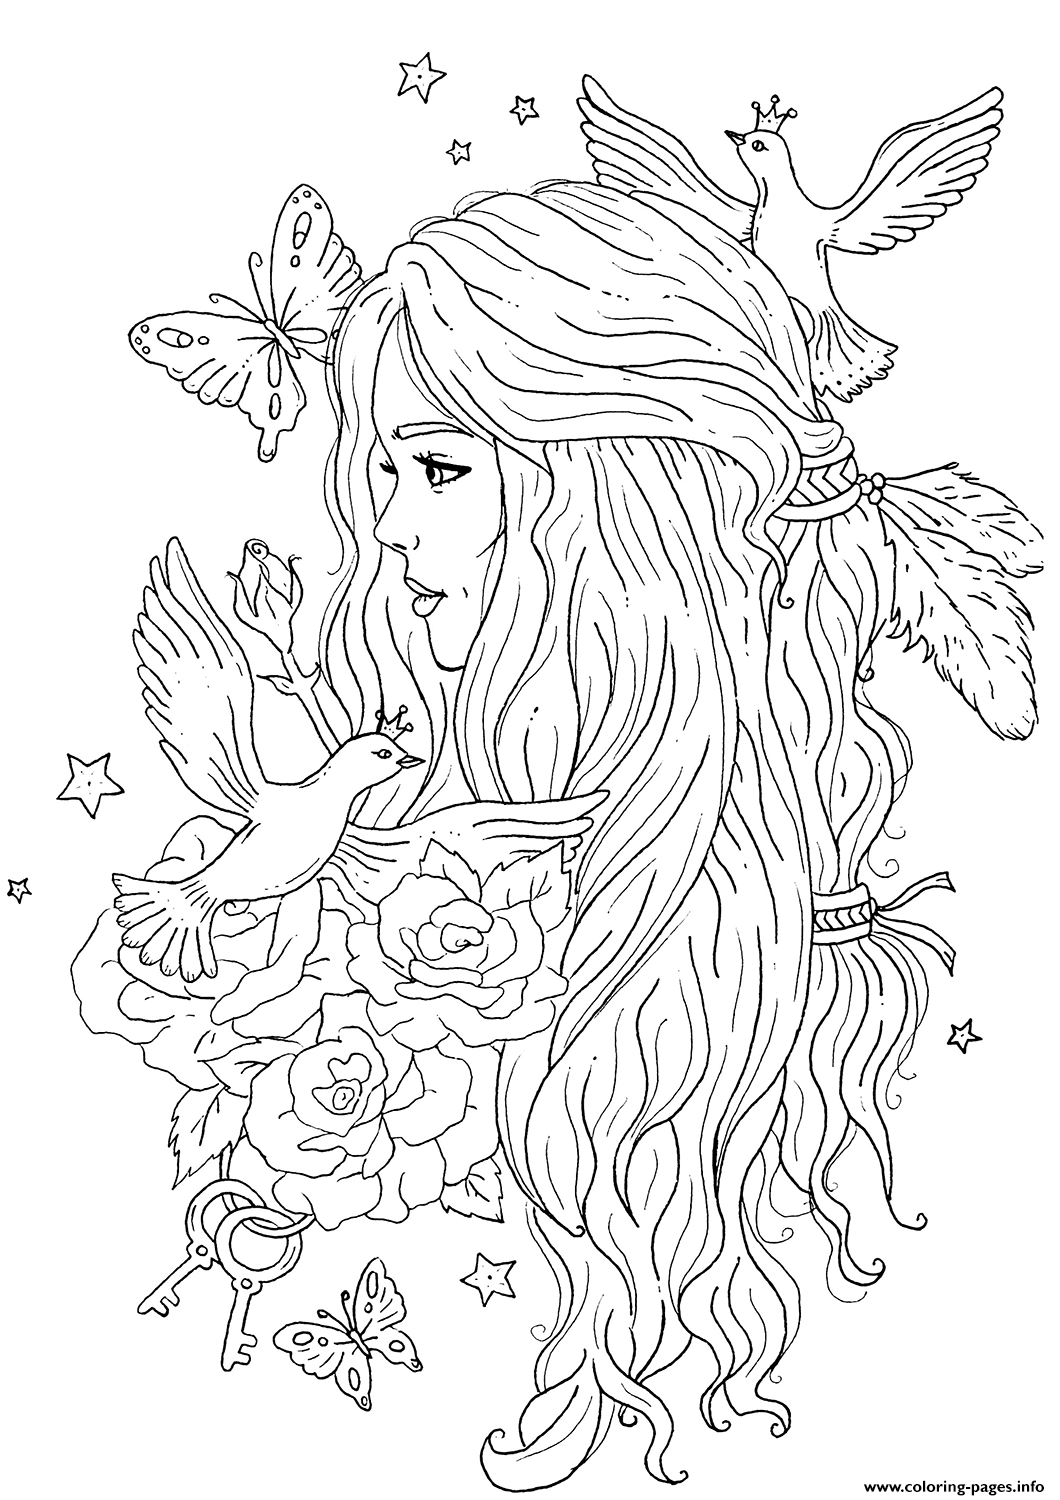 Princess Flowers Birds Coloring Pages Printable